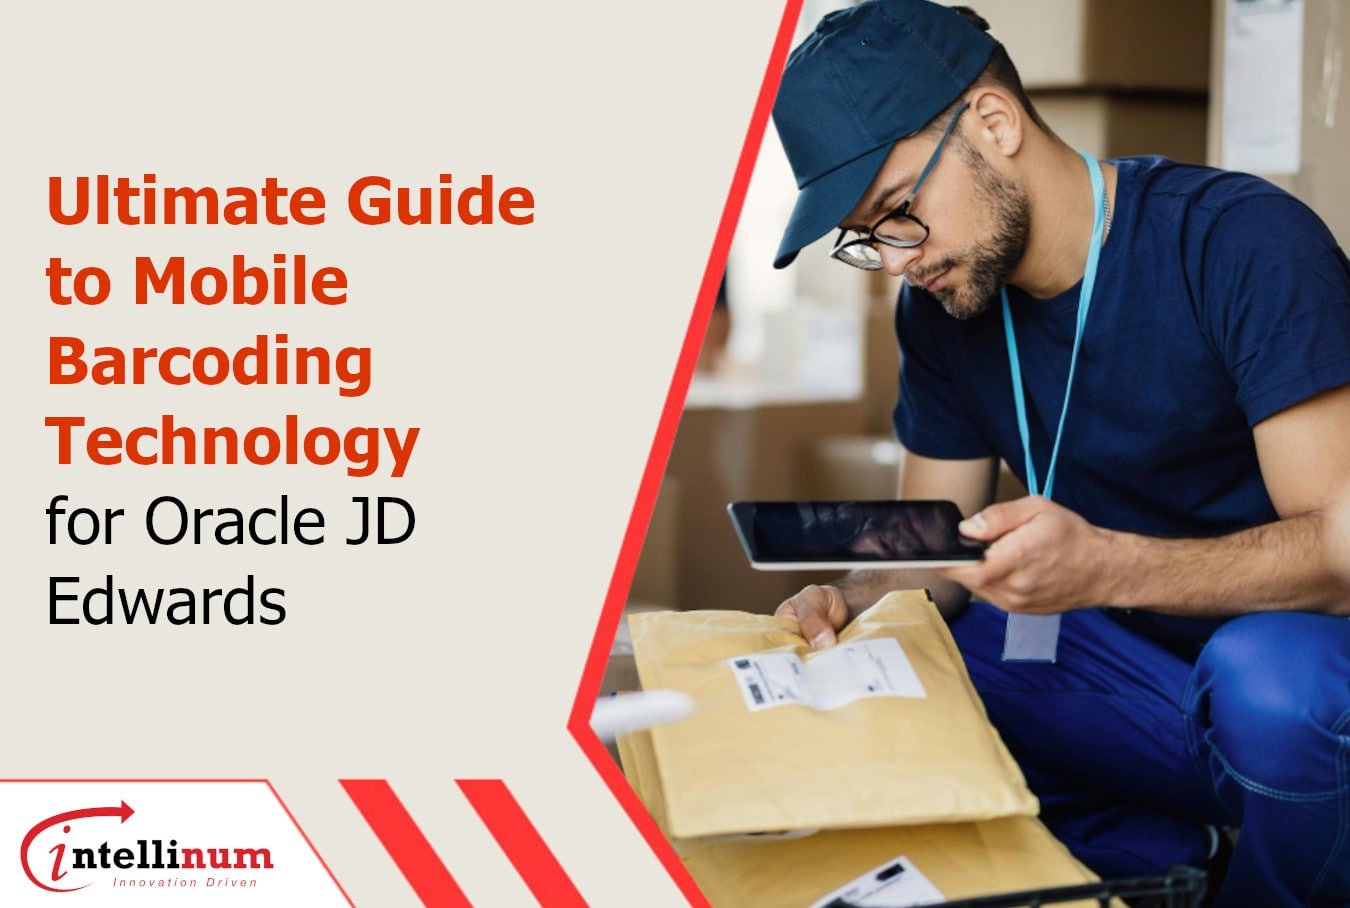 Mobile Barcoding Technology for Oracle JD Edwards